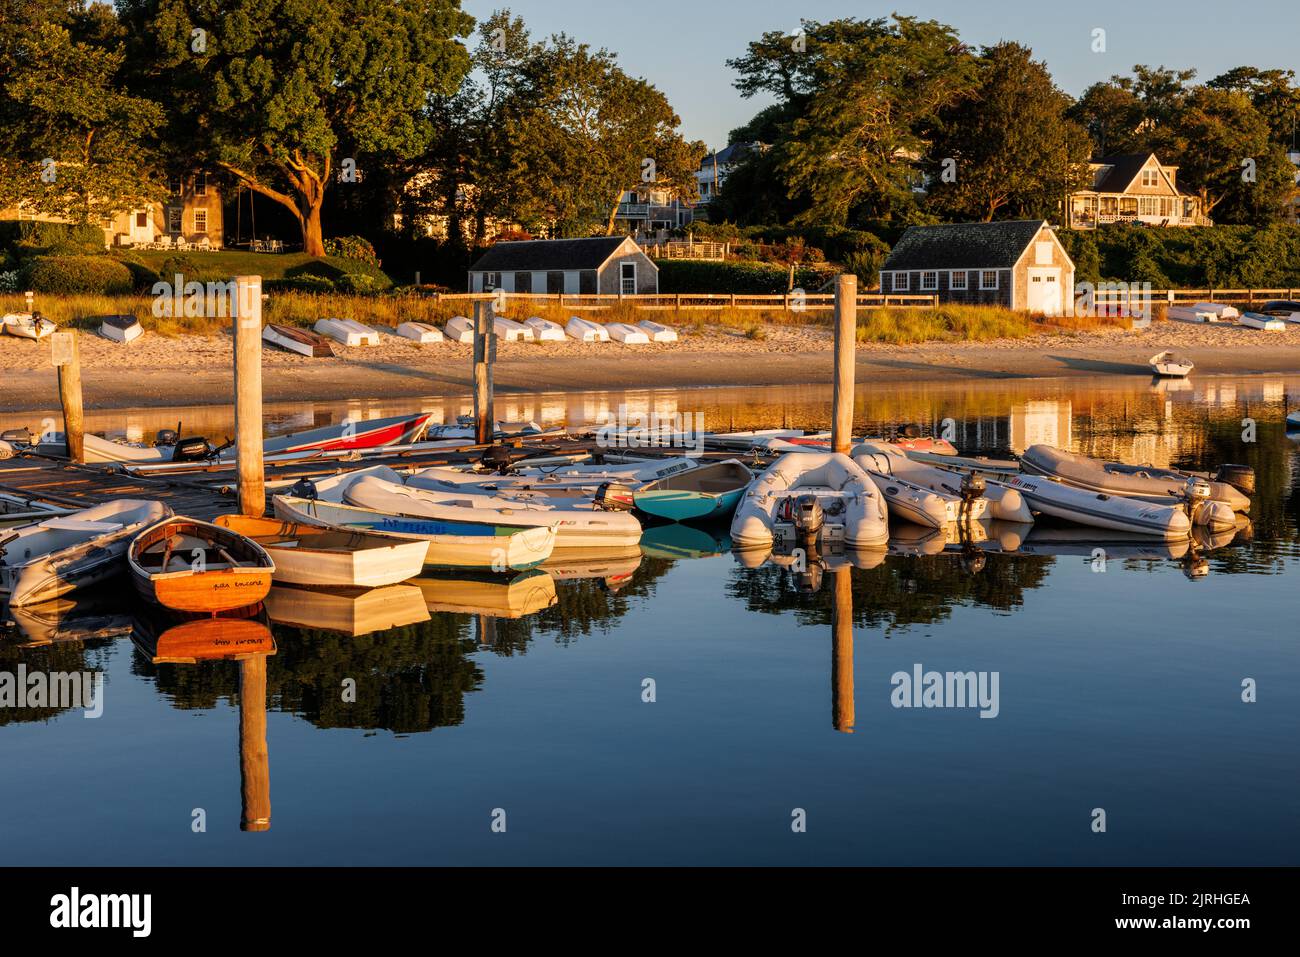 Dinghies tied up at Owen Park Town Dock and on nearby Owen Park Beach in Vineyard Haven (Tisbury), Massachusetts on Martha's Vineyard. Stock Photo